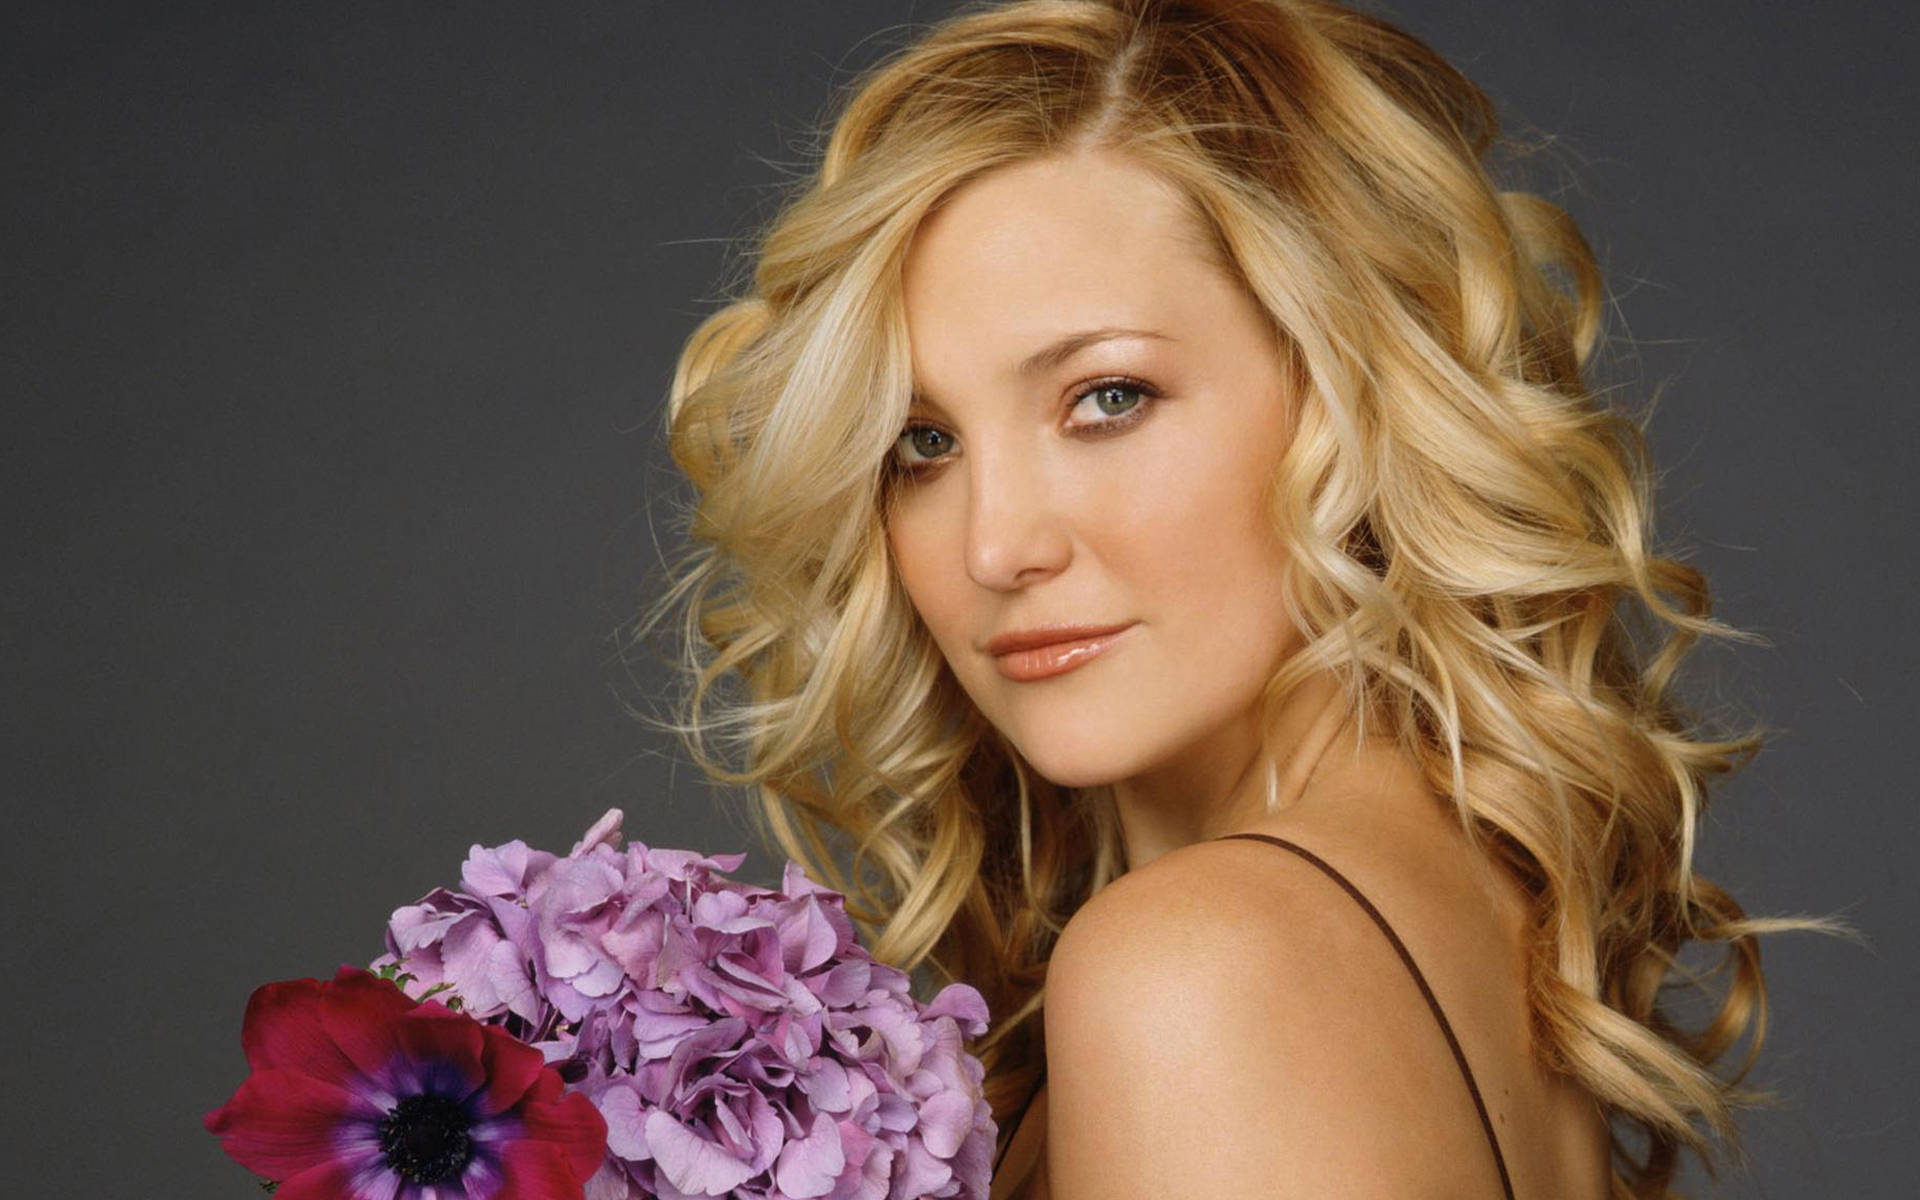 Kate Hudson With Pansy Flowers Wallpaper